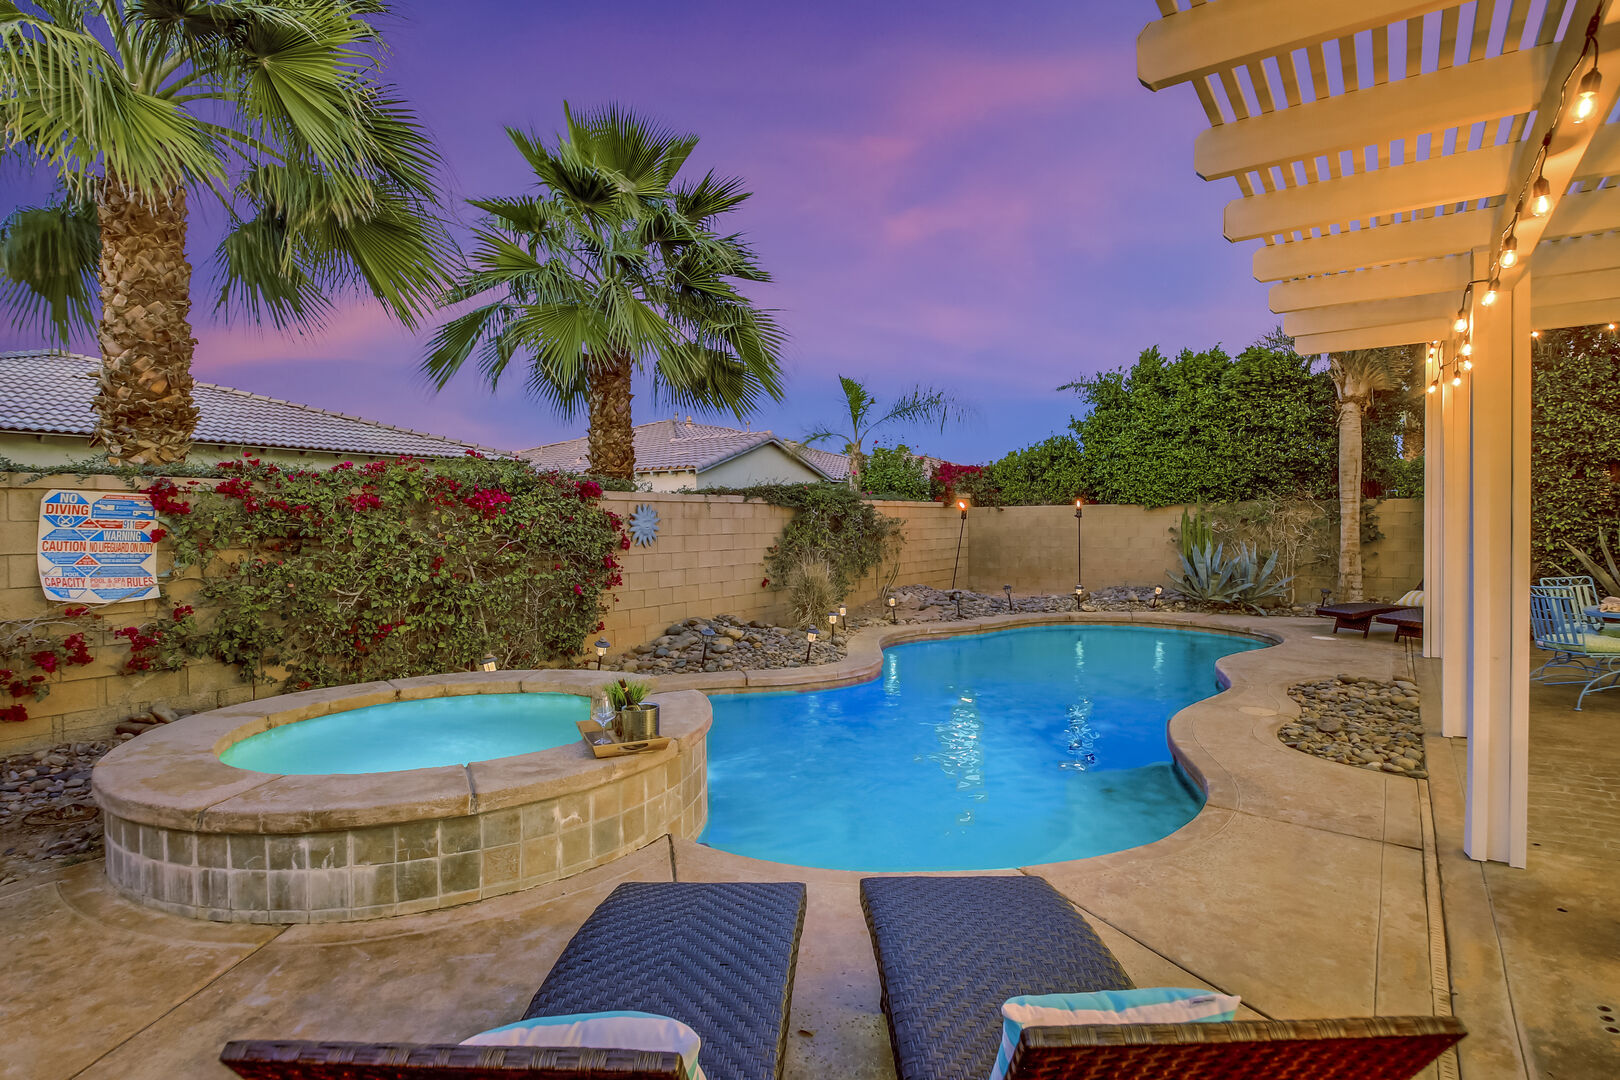 Treat yourself to the perfect vacation rental close to the Coachella Valley Music Festival and polo grounds.